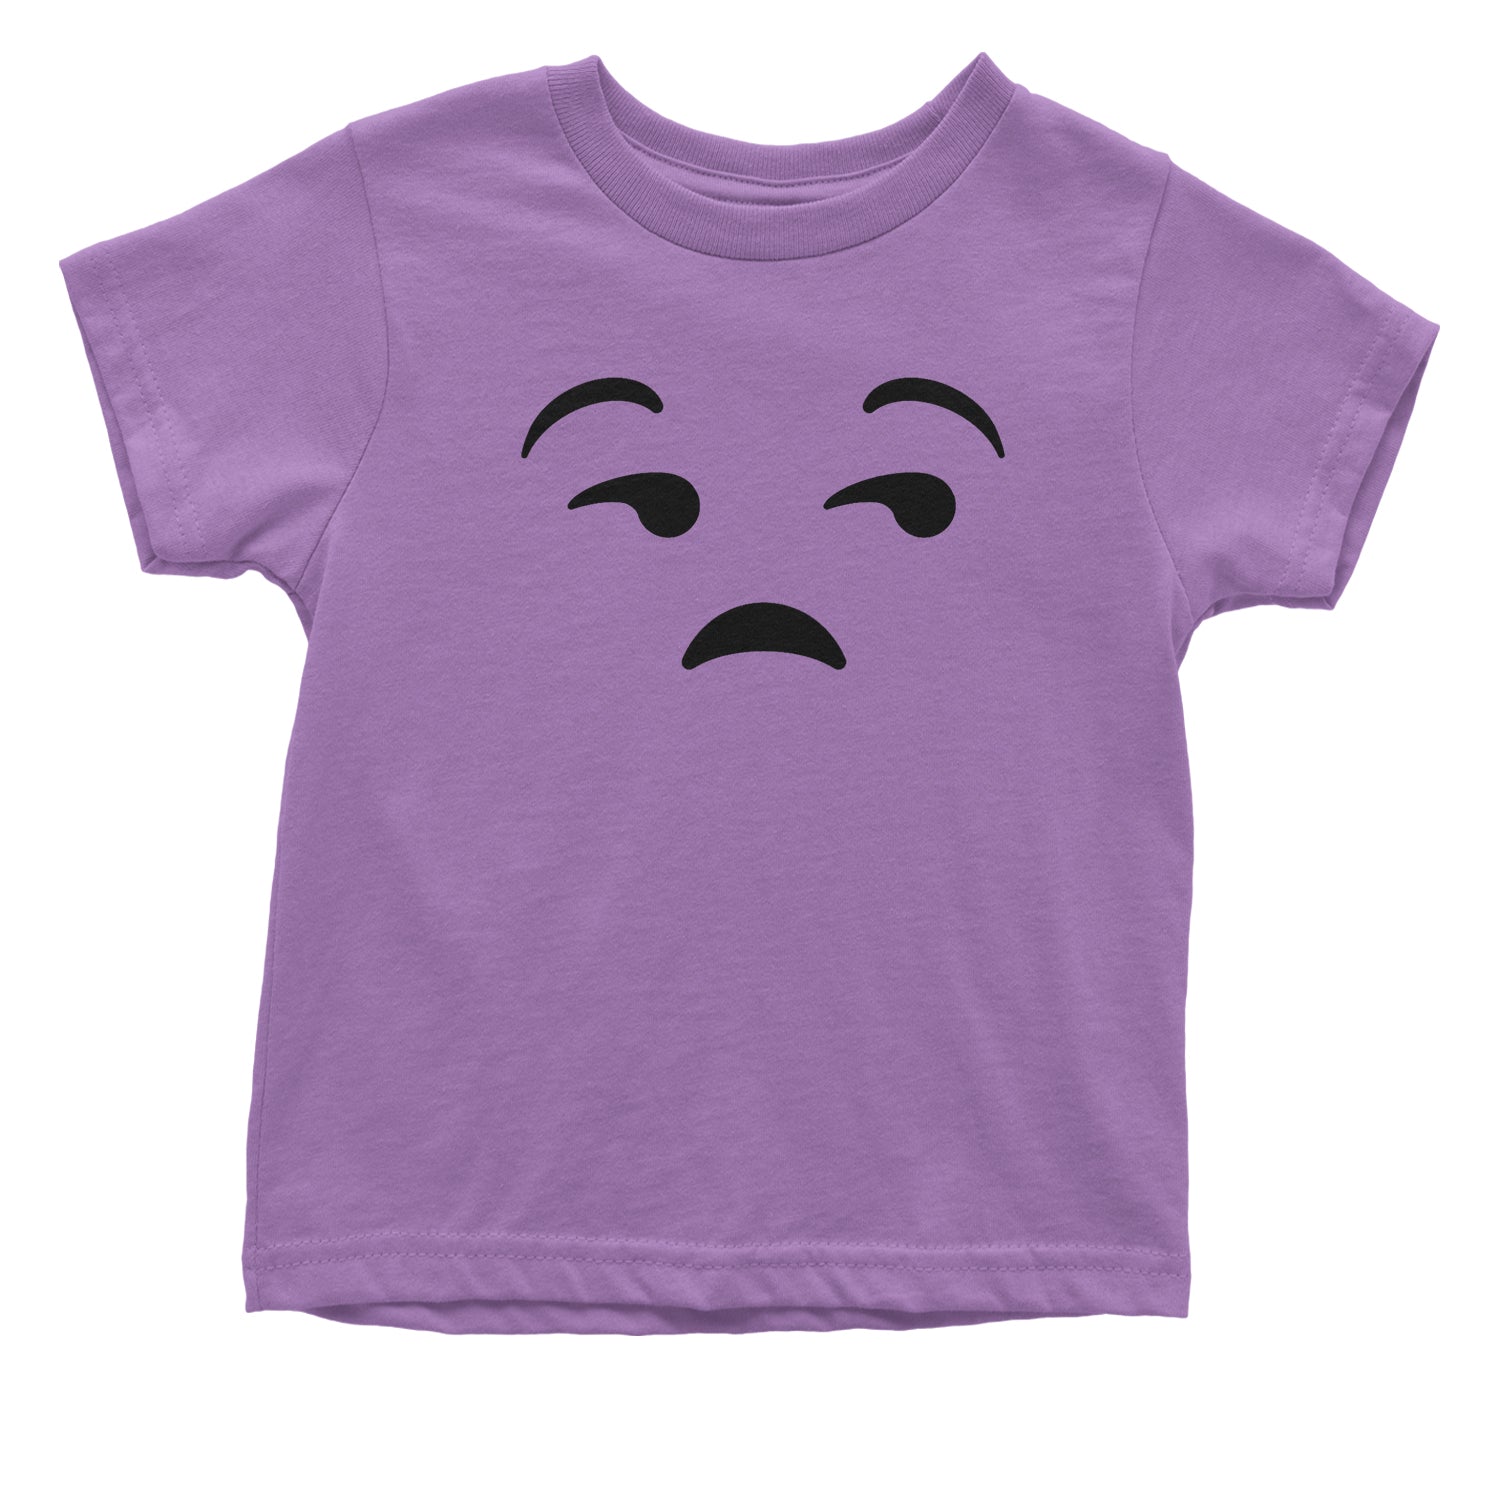 Emoticon Whatever Smile Face Toddler T-Shirt cosplay, costume, dress, emoji, emote, face, halloween, smiley, up, yellow by Expression Tees